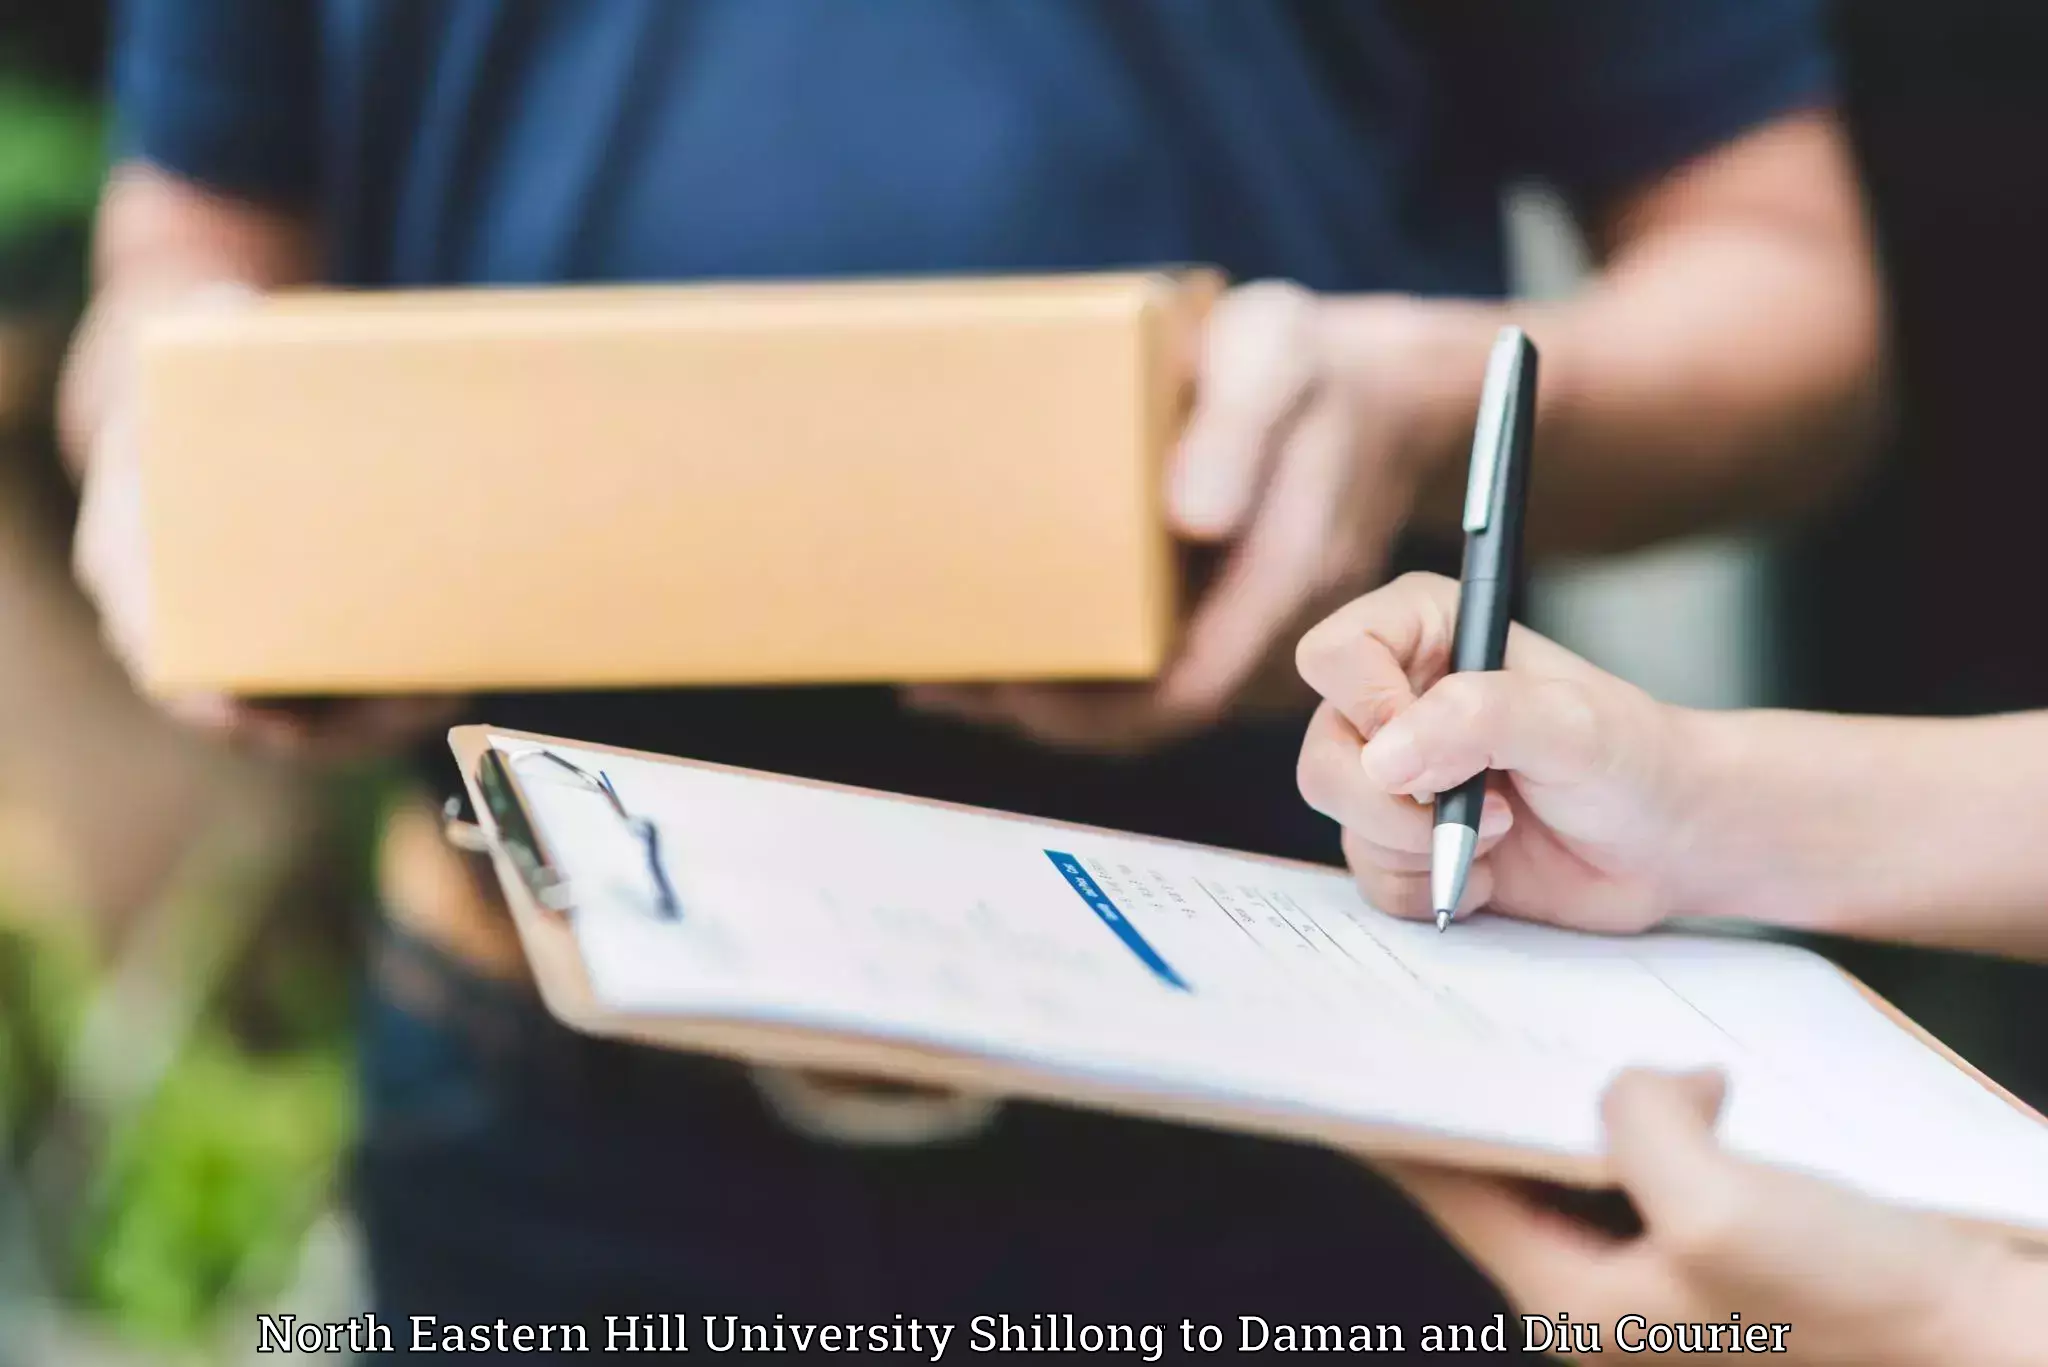 Professional relocation services North Eastern Hill University Shillong to Daman and Diu